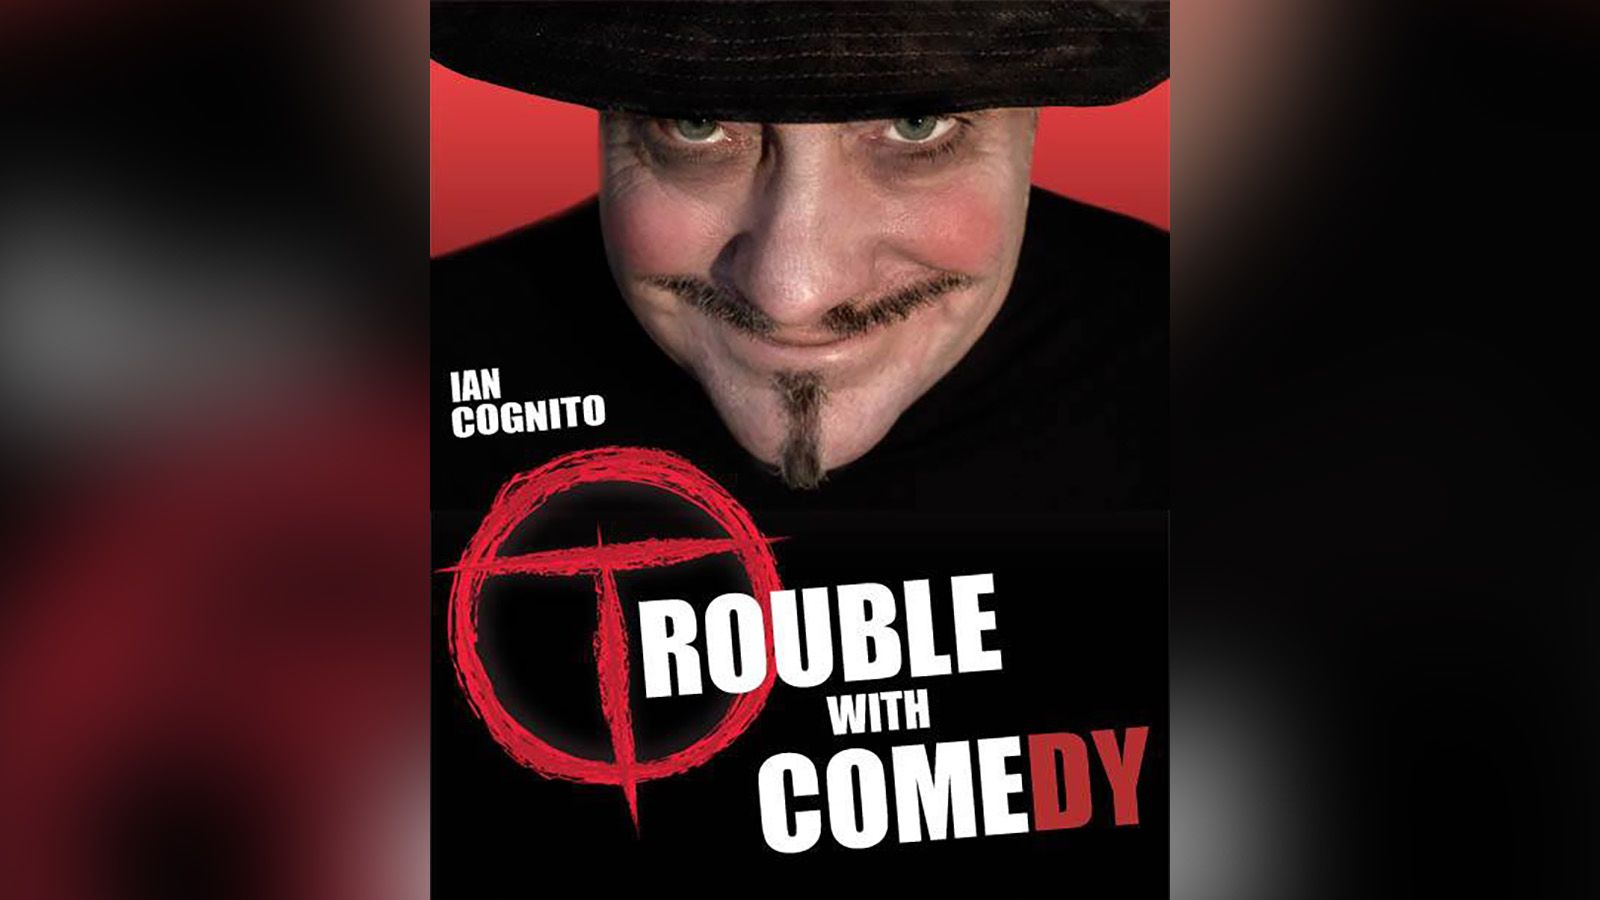 British comedian Ian Cognito died during a comedy gig in the British town of Bicester. 